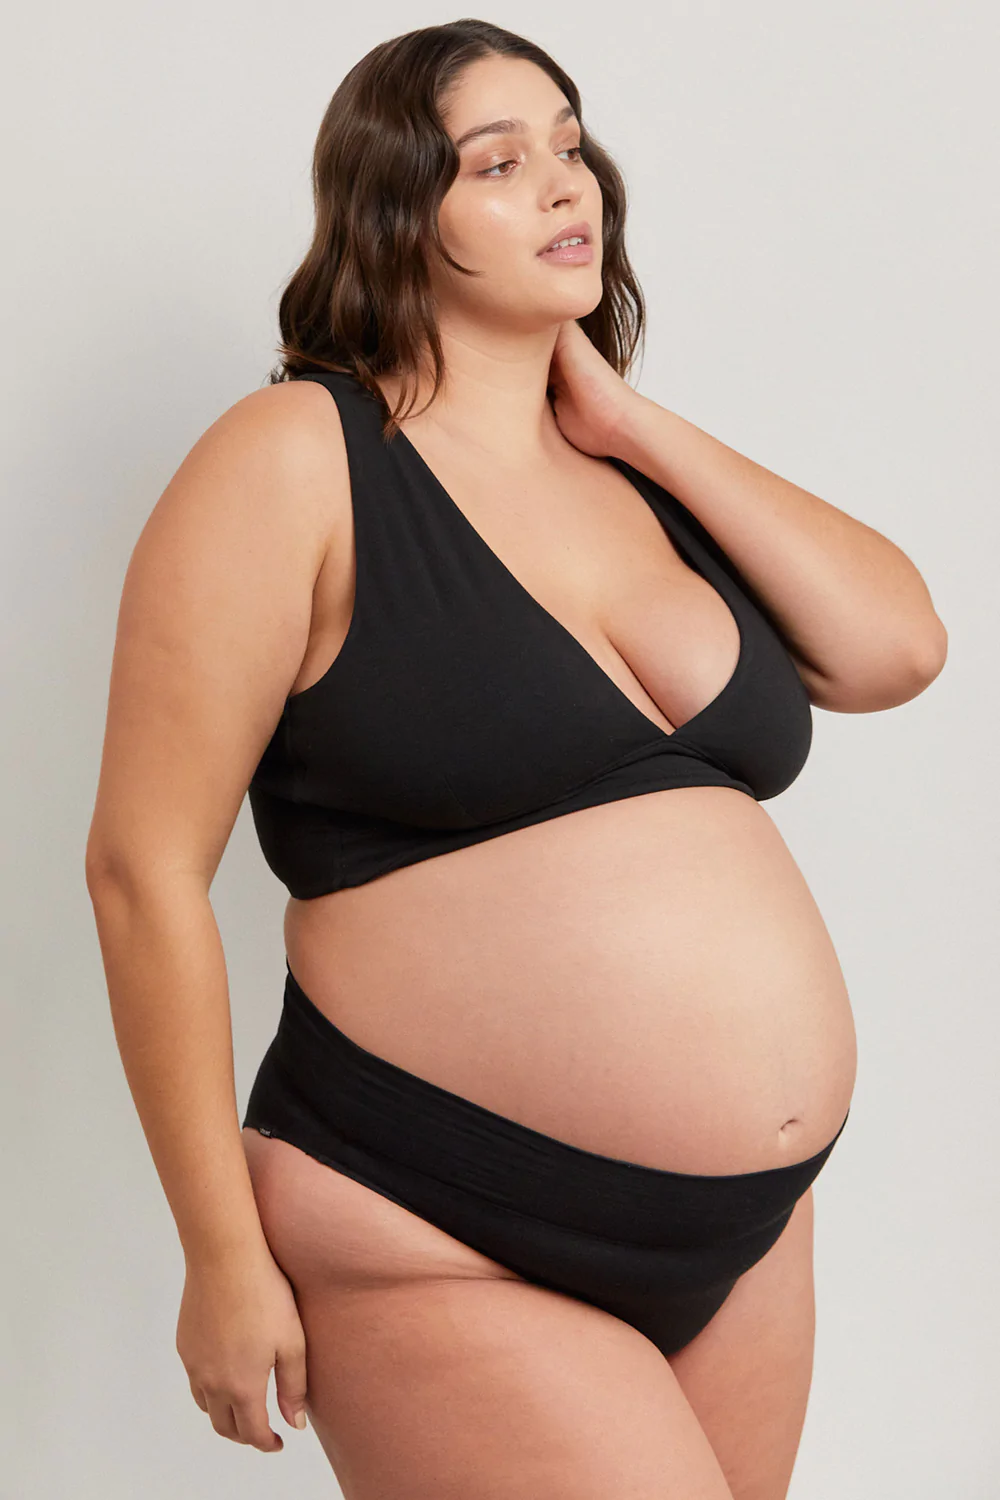 organic maternity underwear from le buns